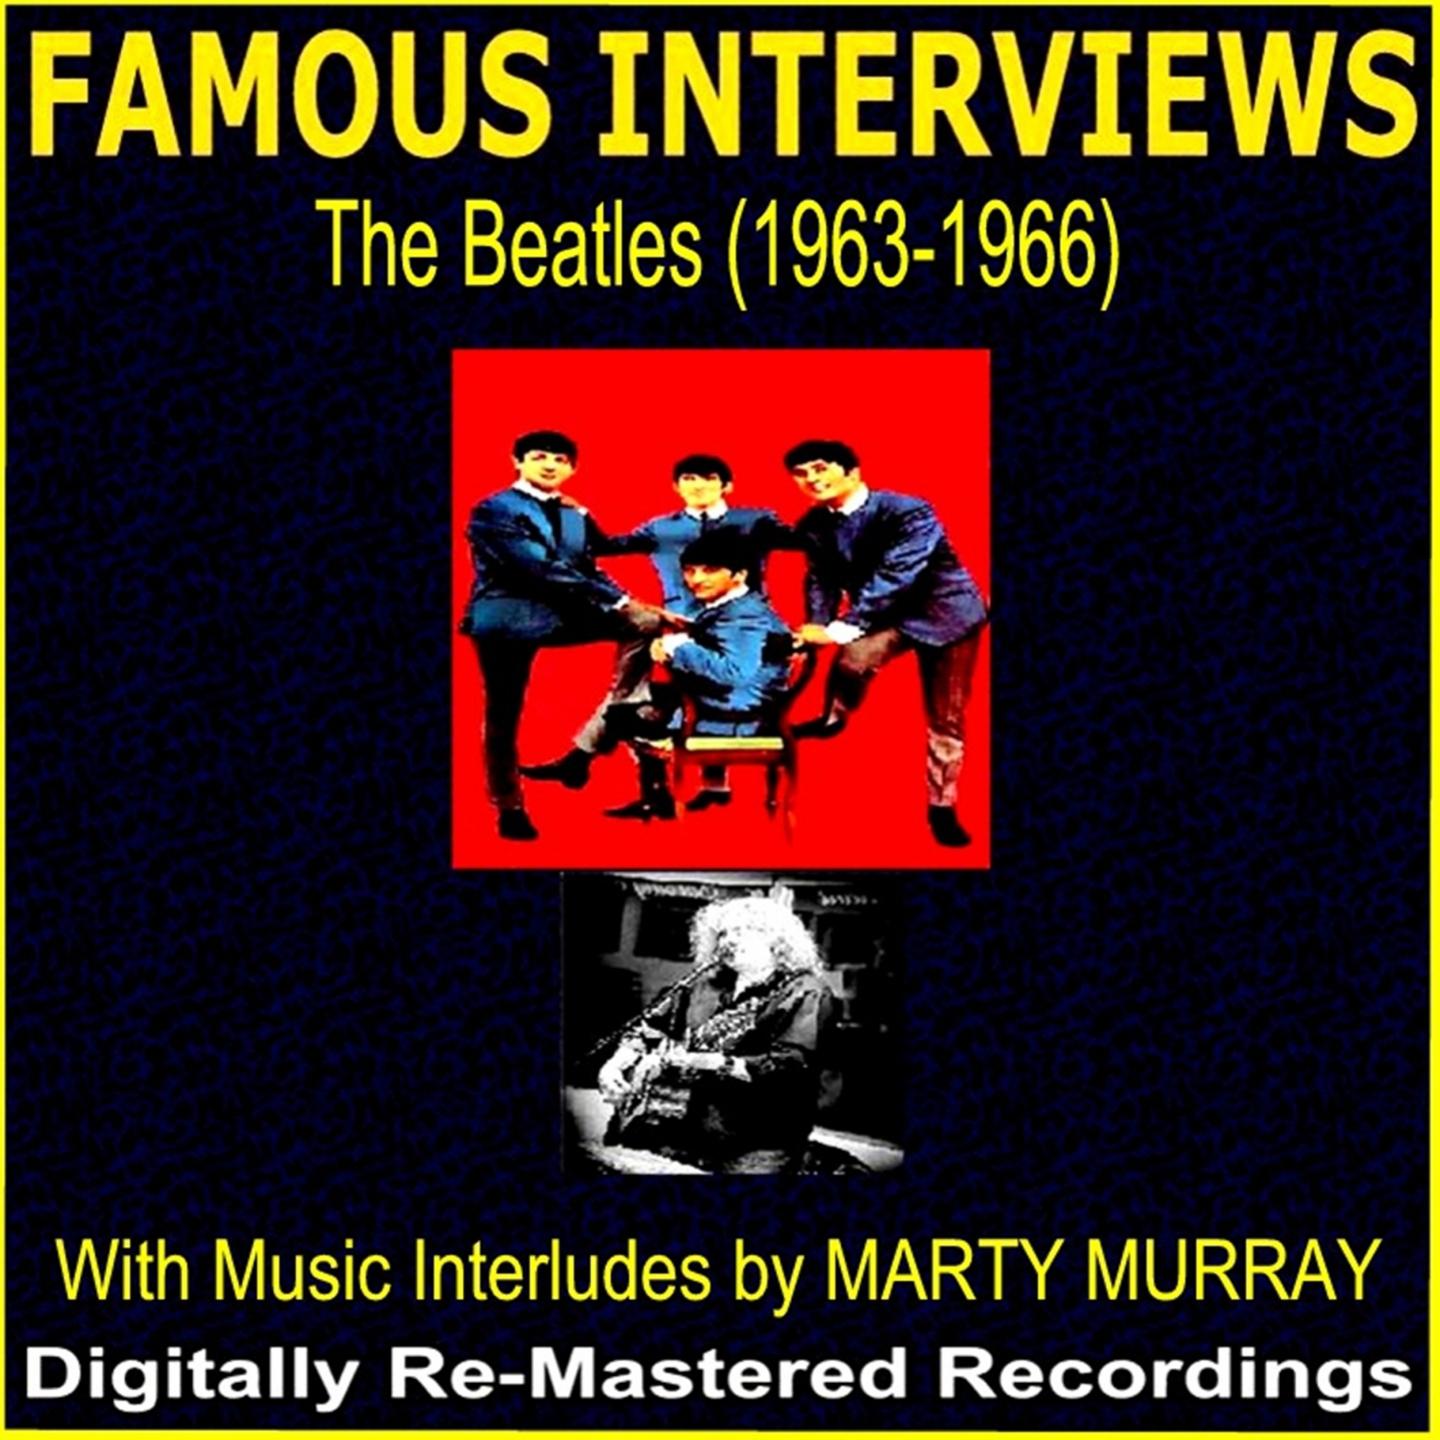 Interview with Ringo Star in Melbourne 1964